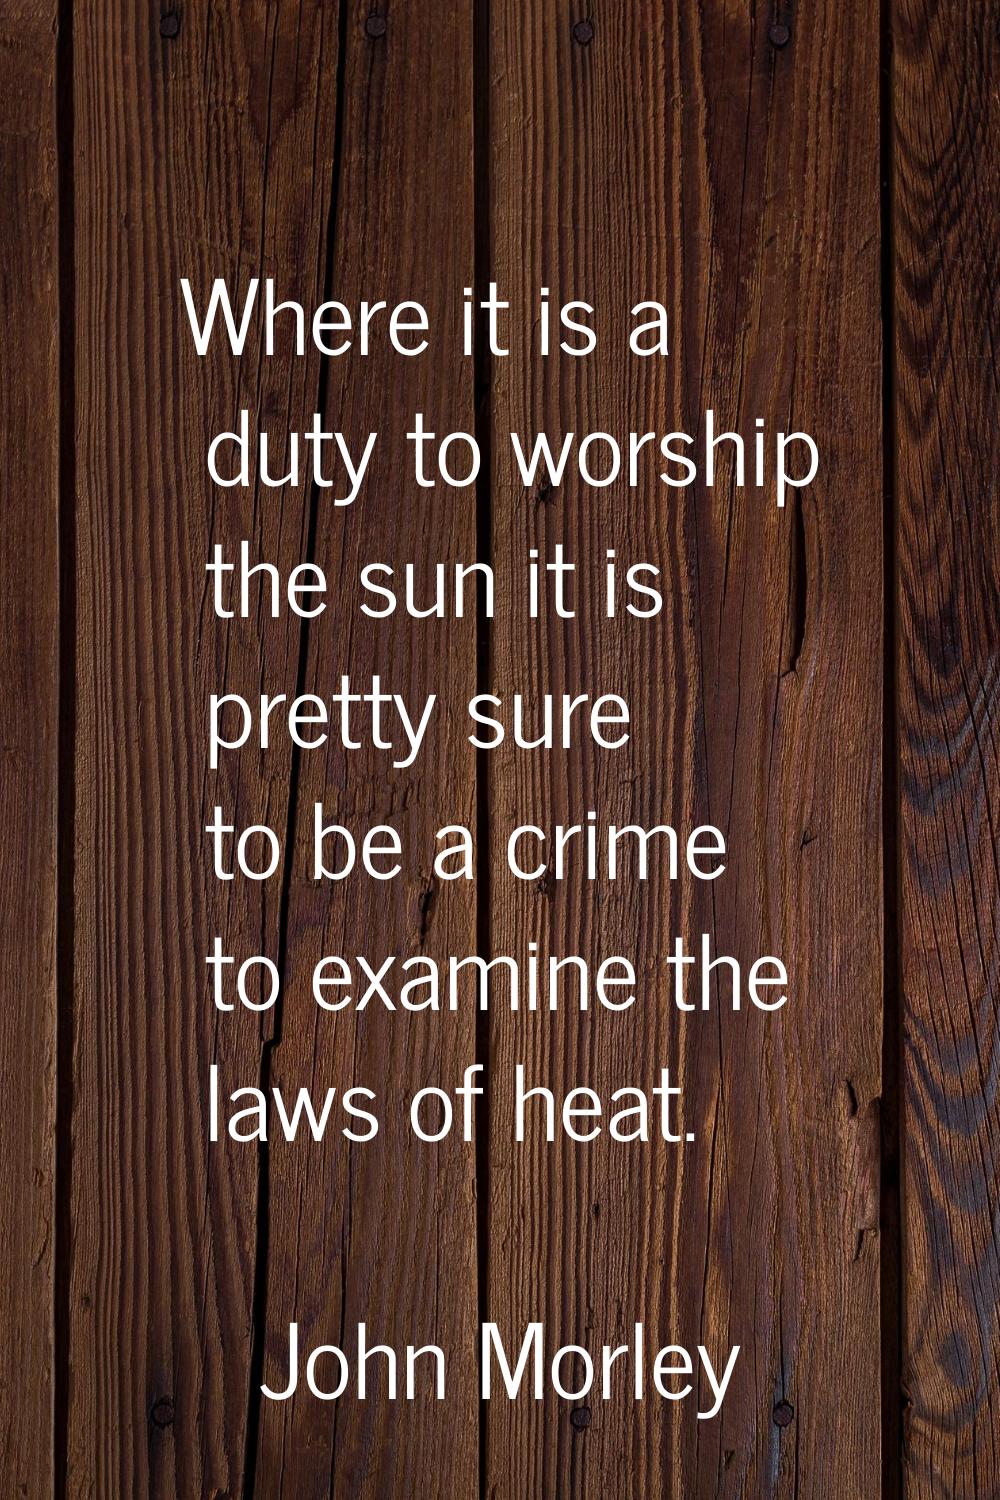 Where it is a duty to worship the sun it is pretty sure to be a crime to examine the laws of heat.